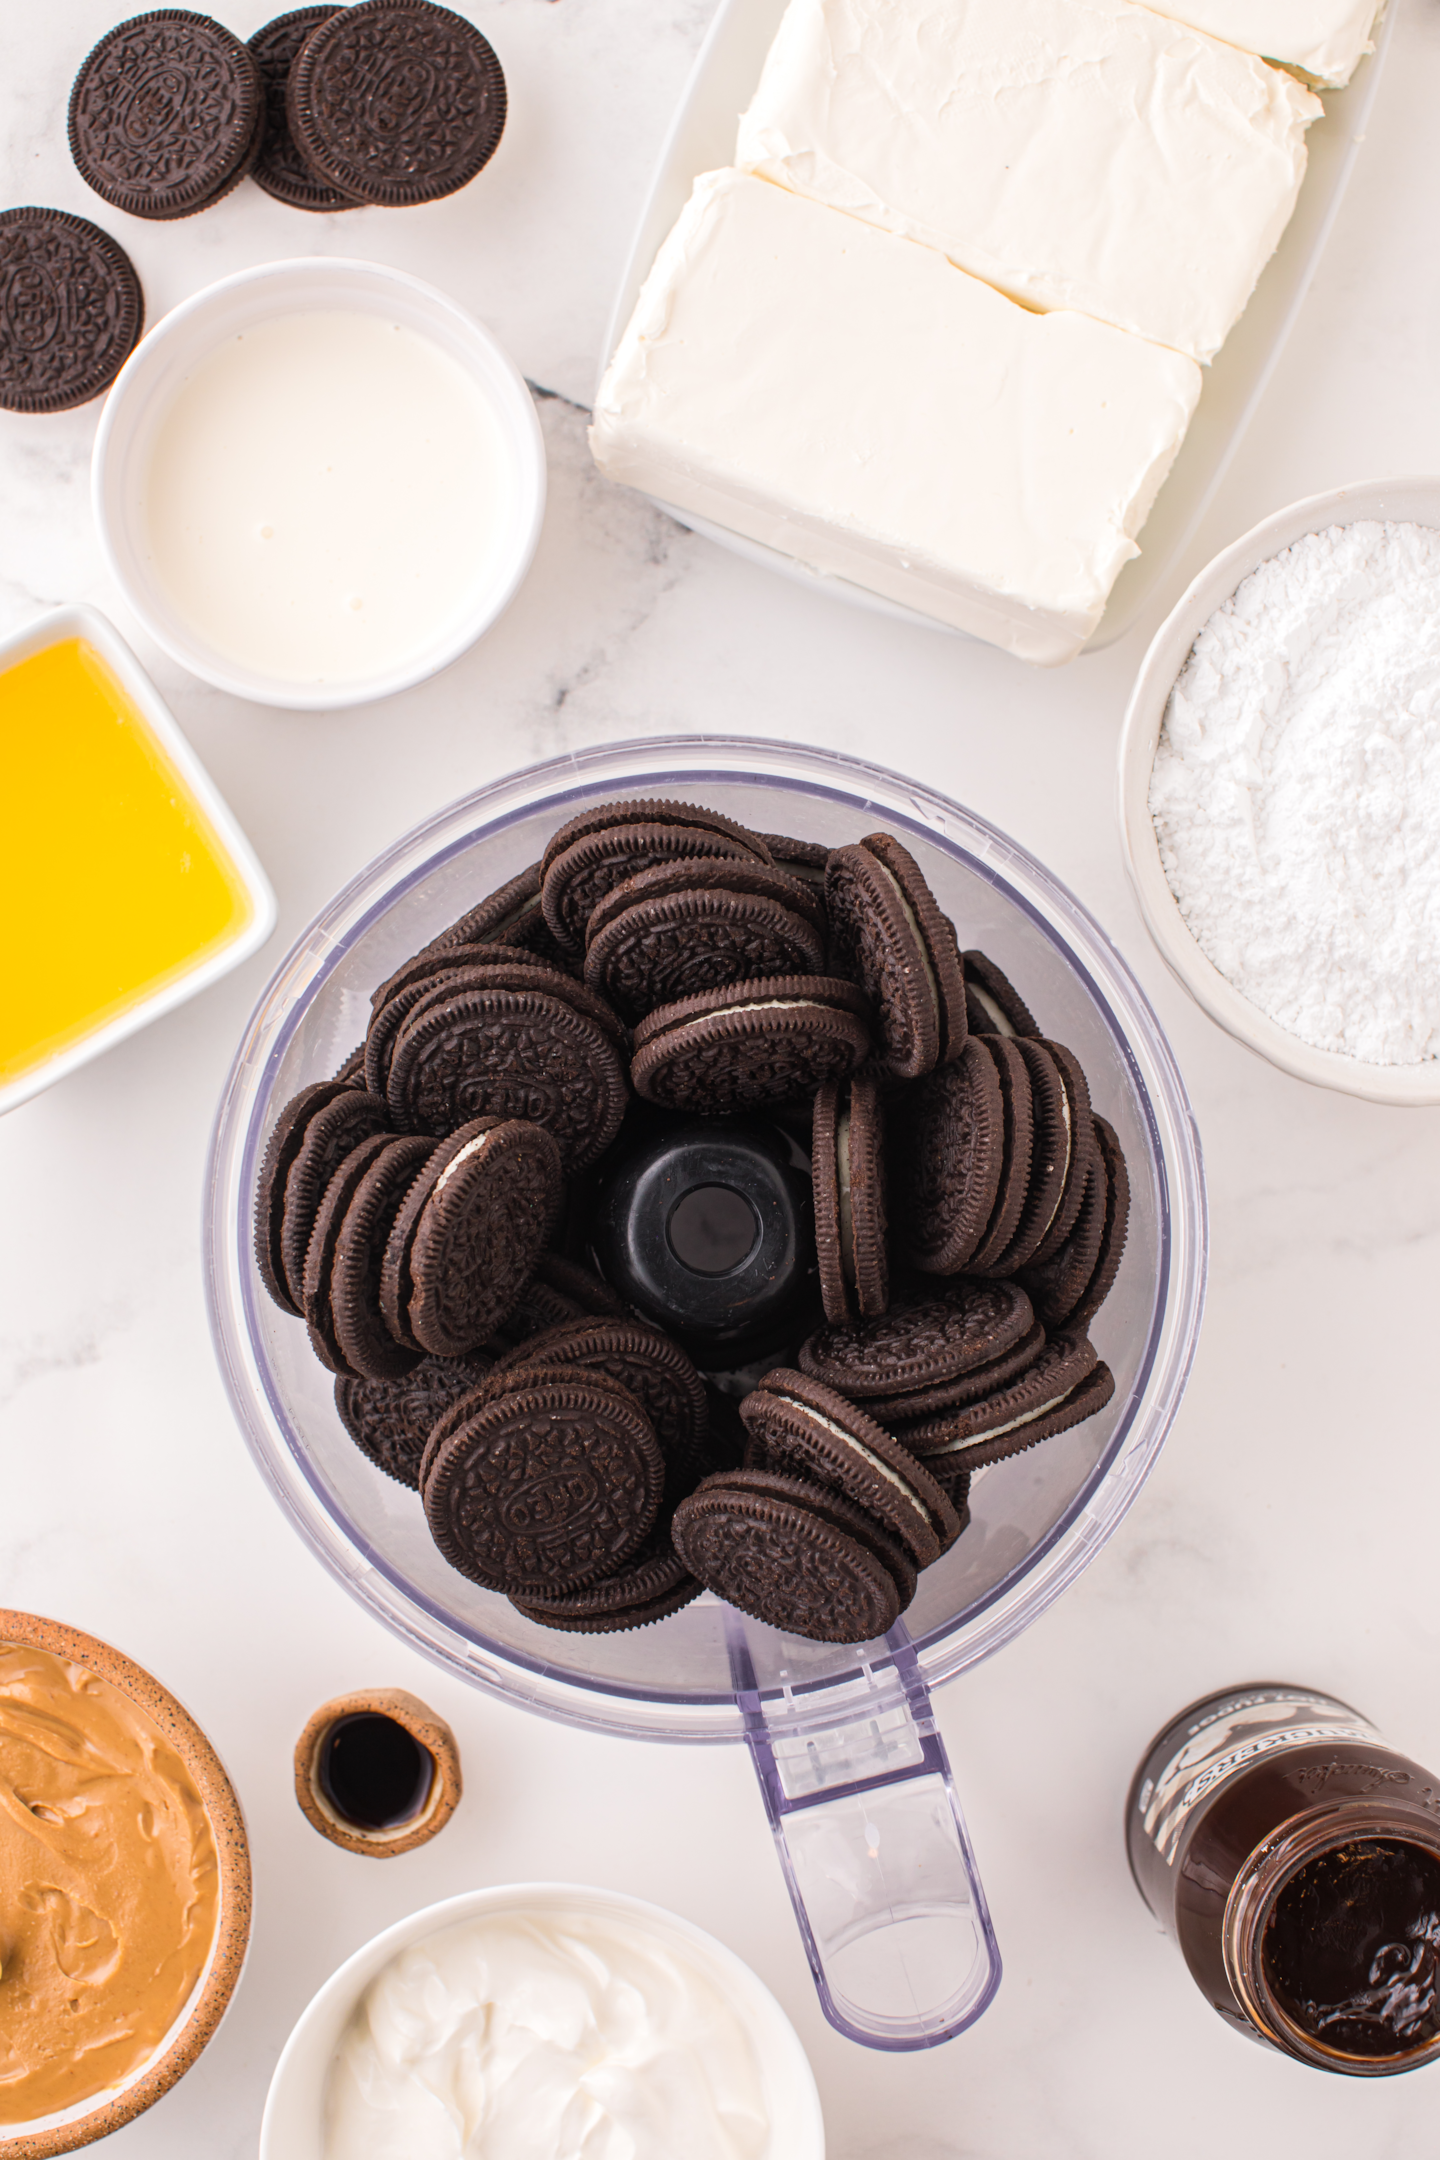 Oreo cookies in a food processor